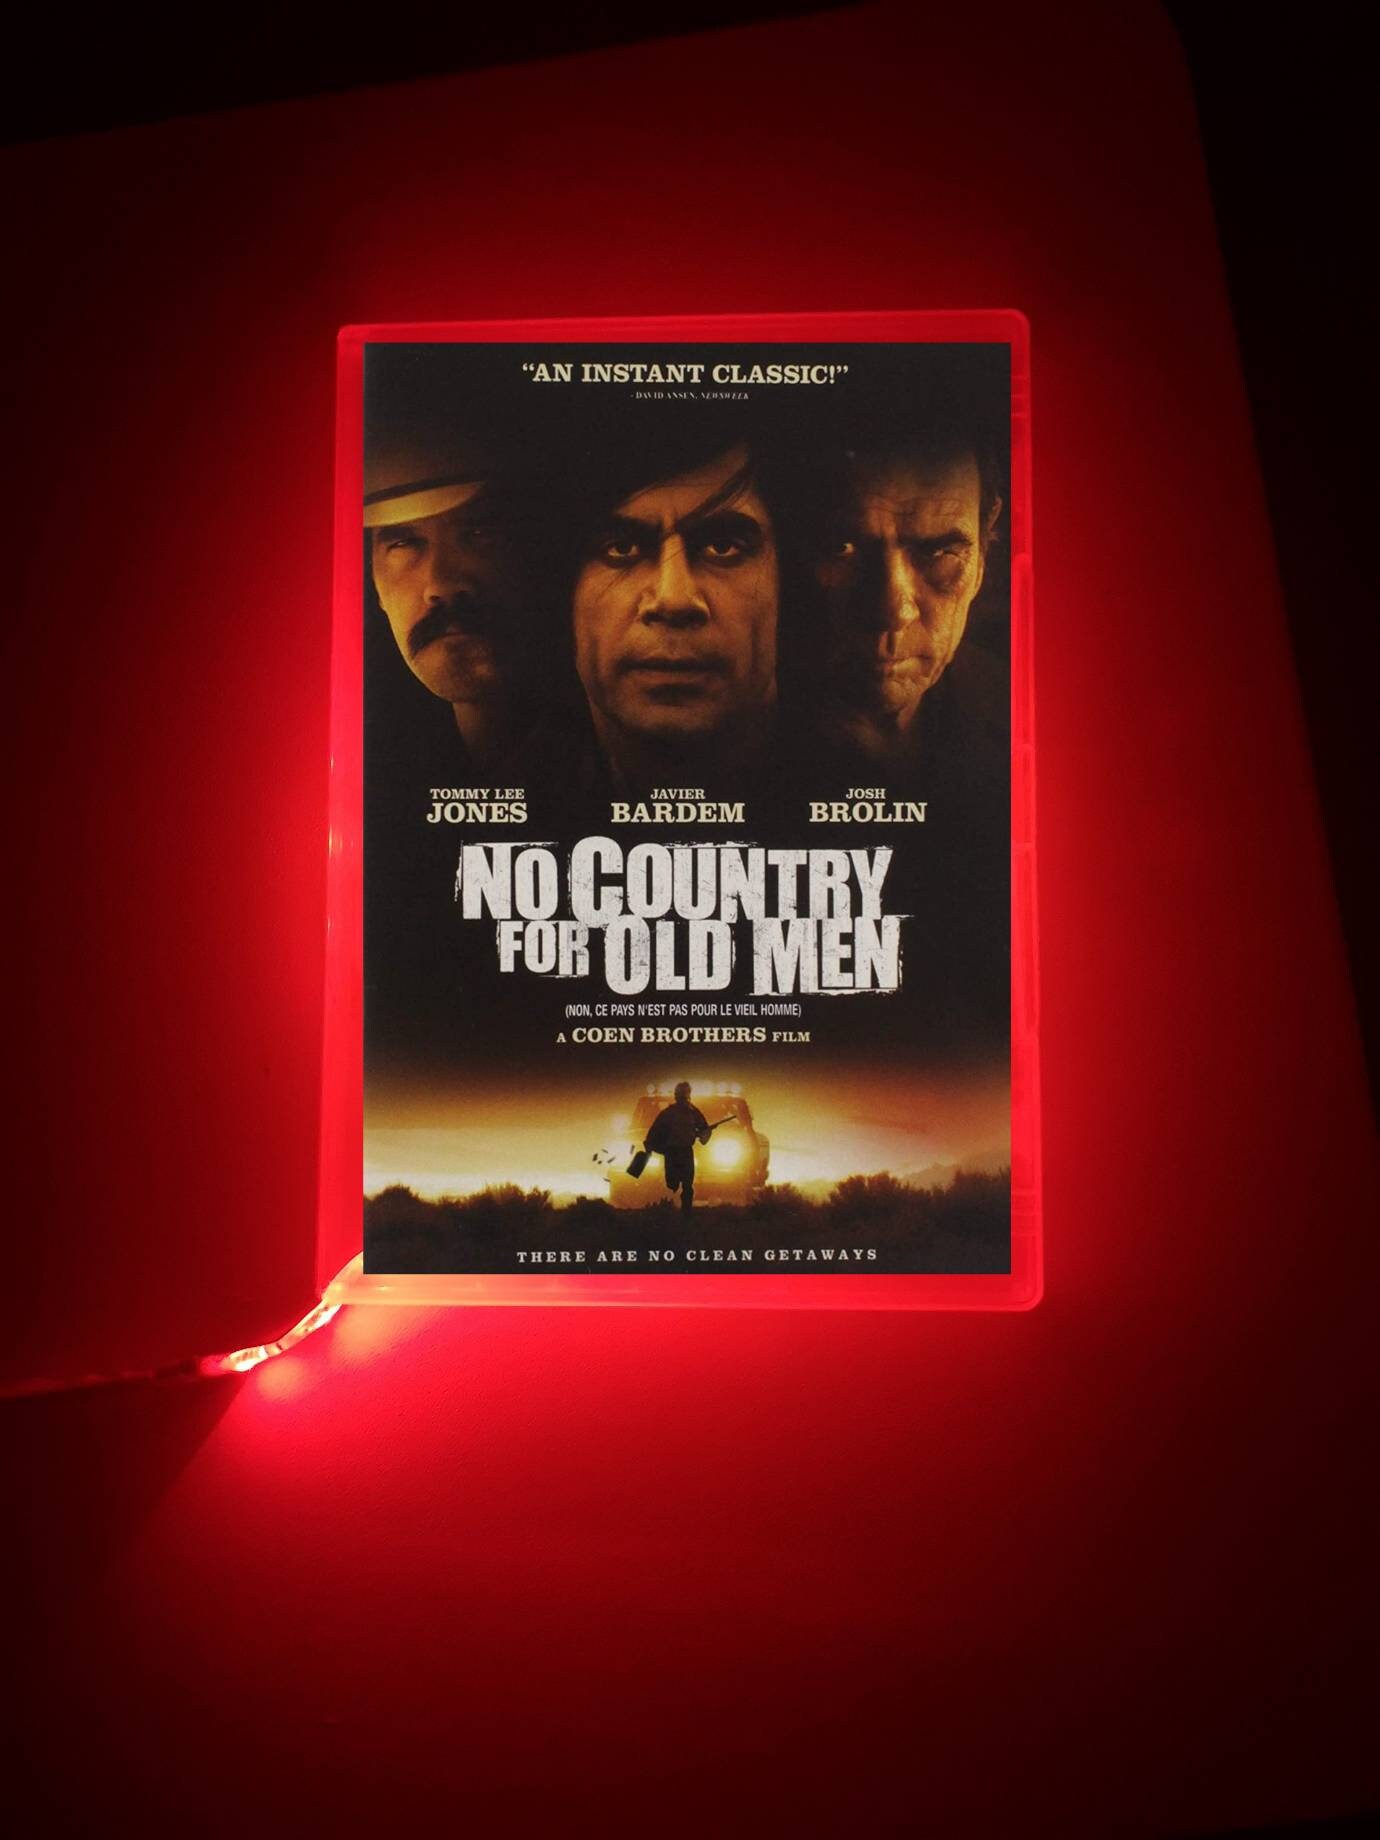 No Country for Old Men review – dark, violent, apocalyptic and triumphant, Movies